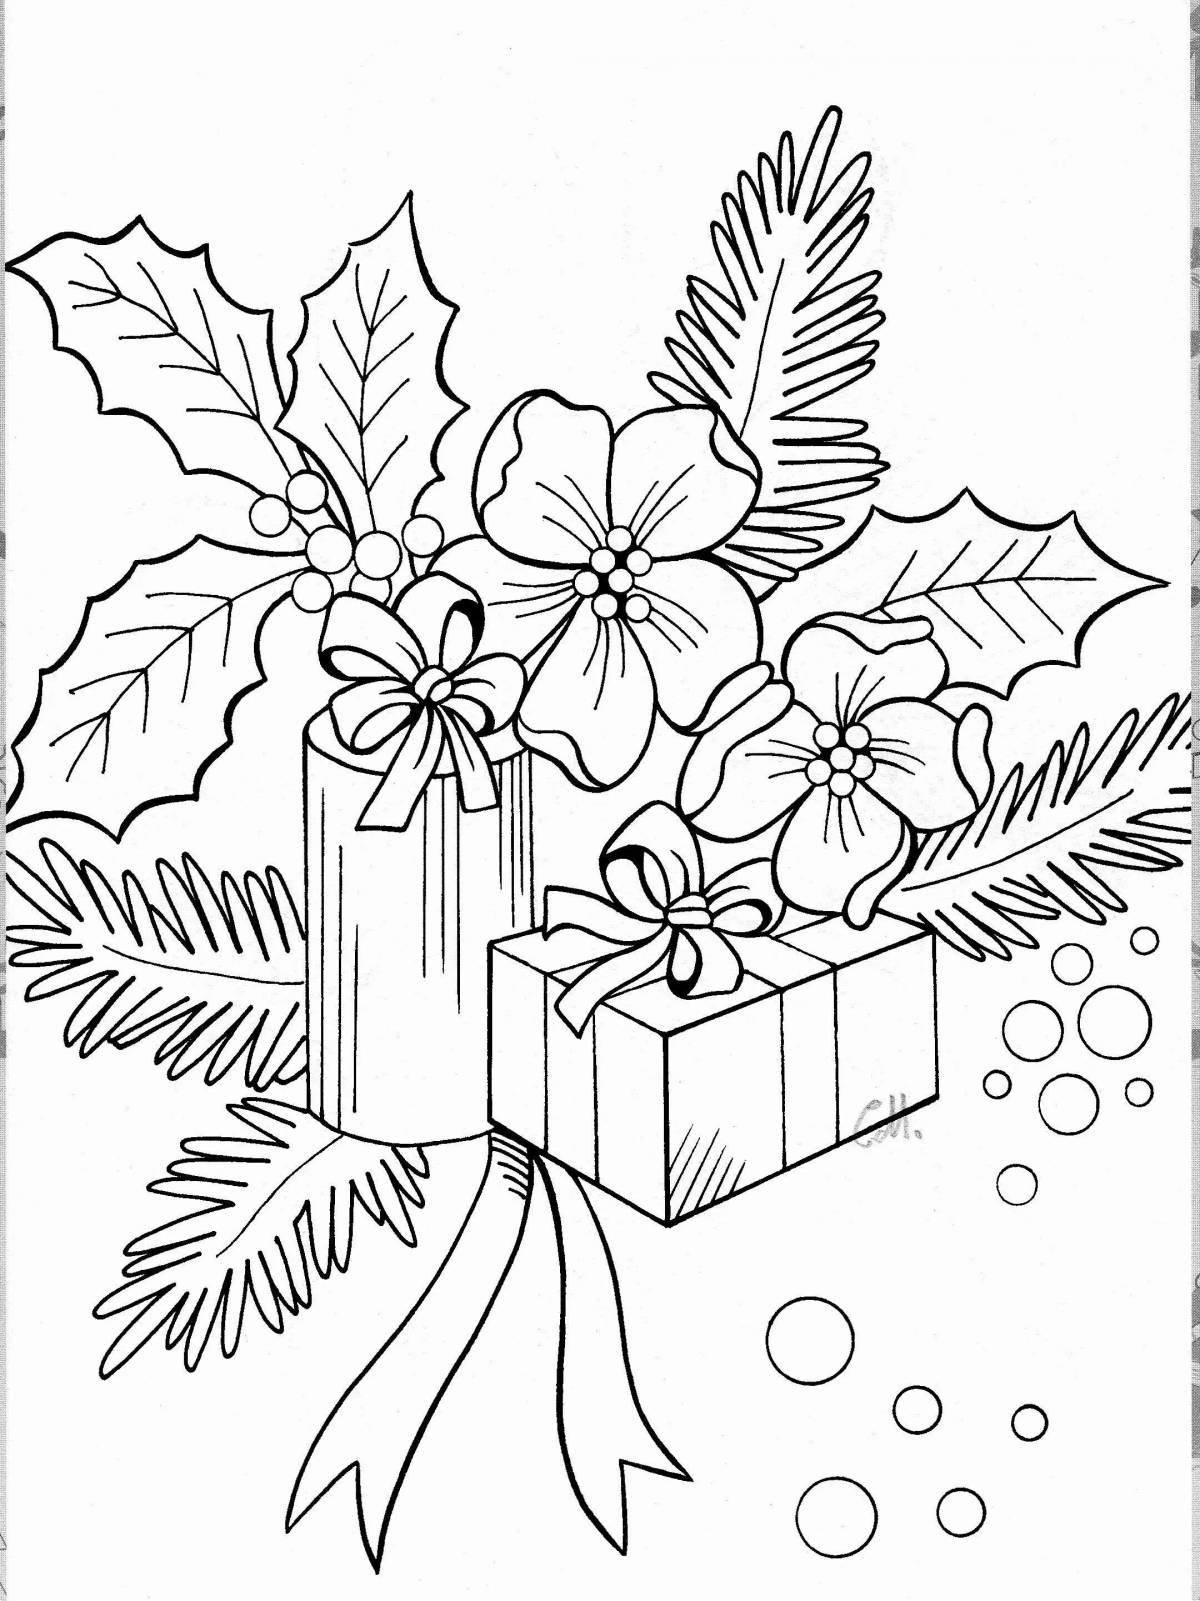 Majestic Christmas flower coloring pages